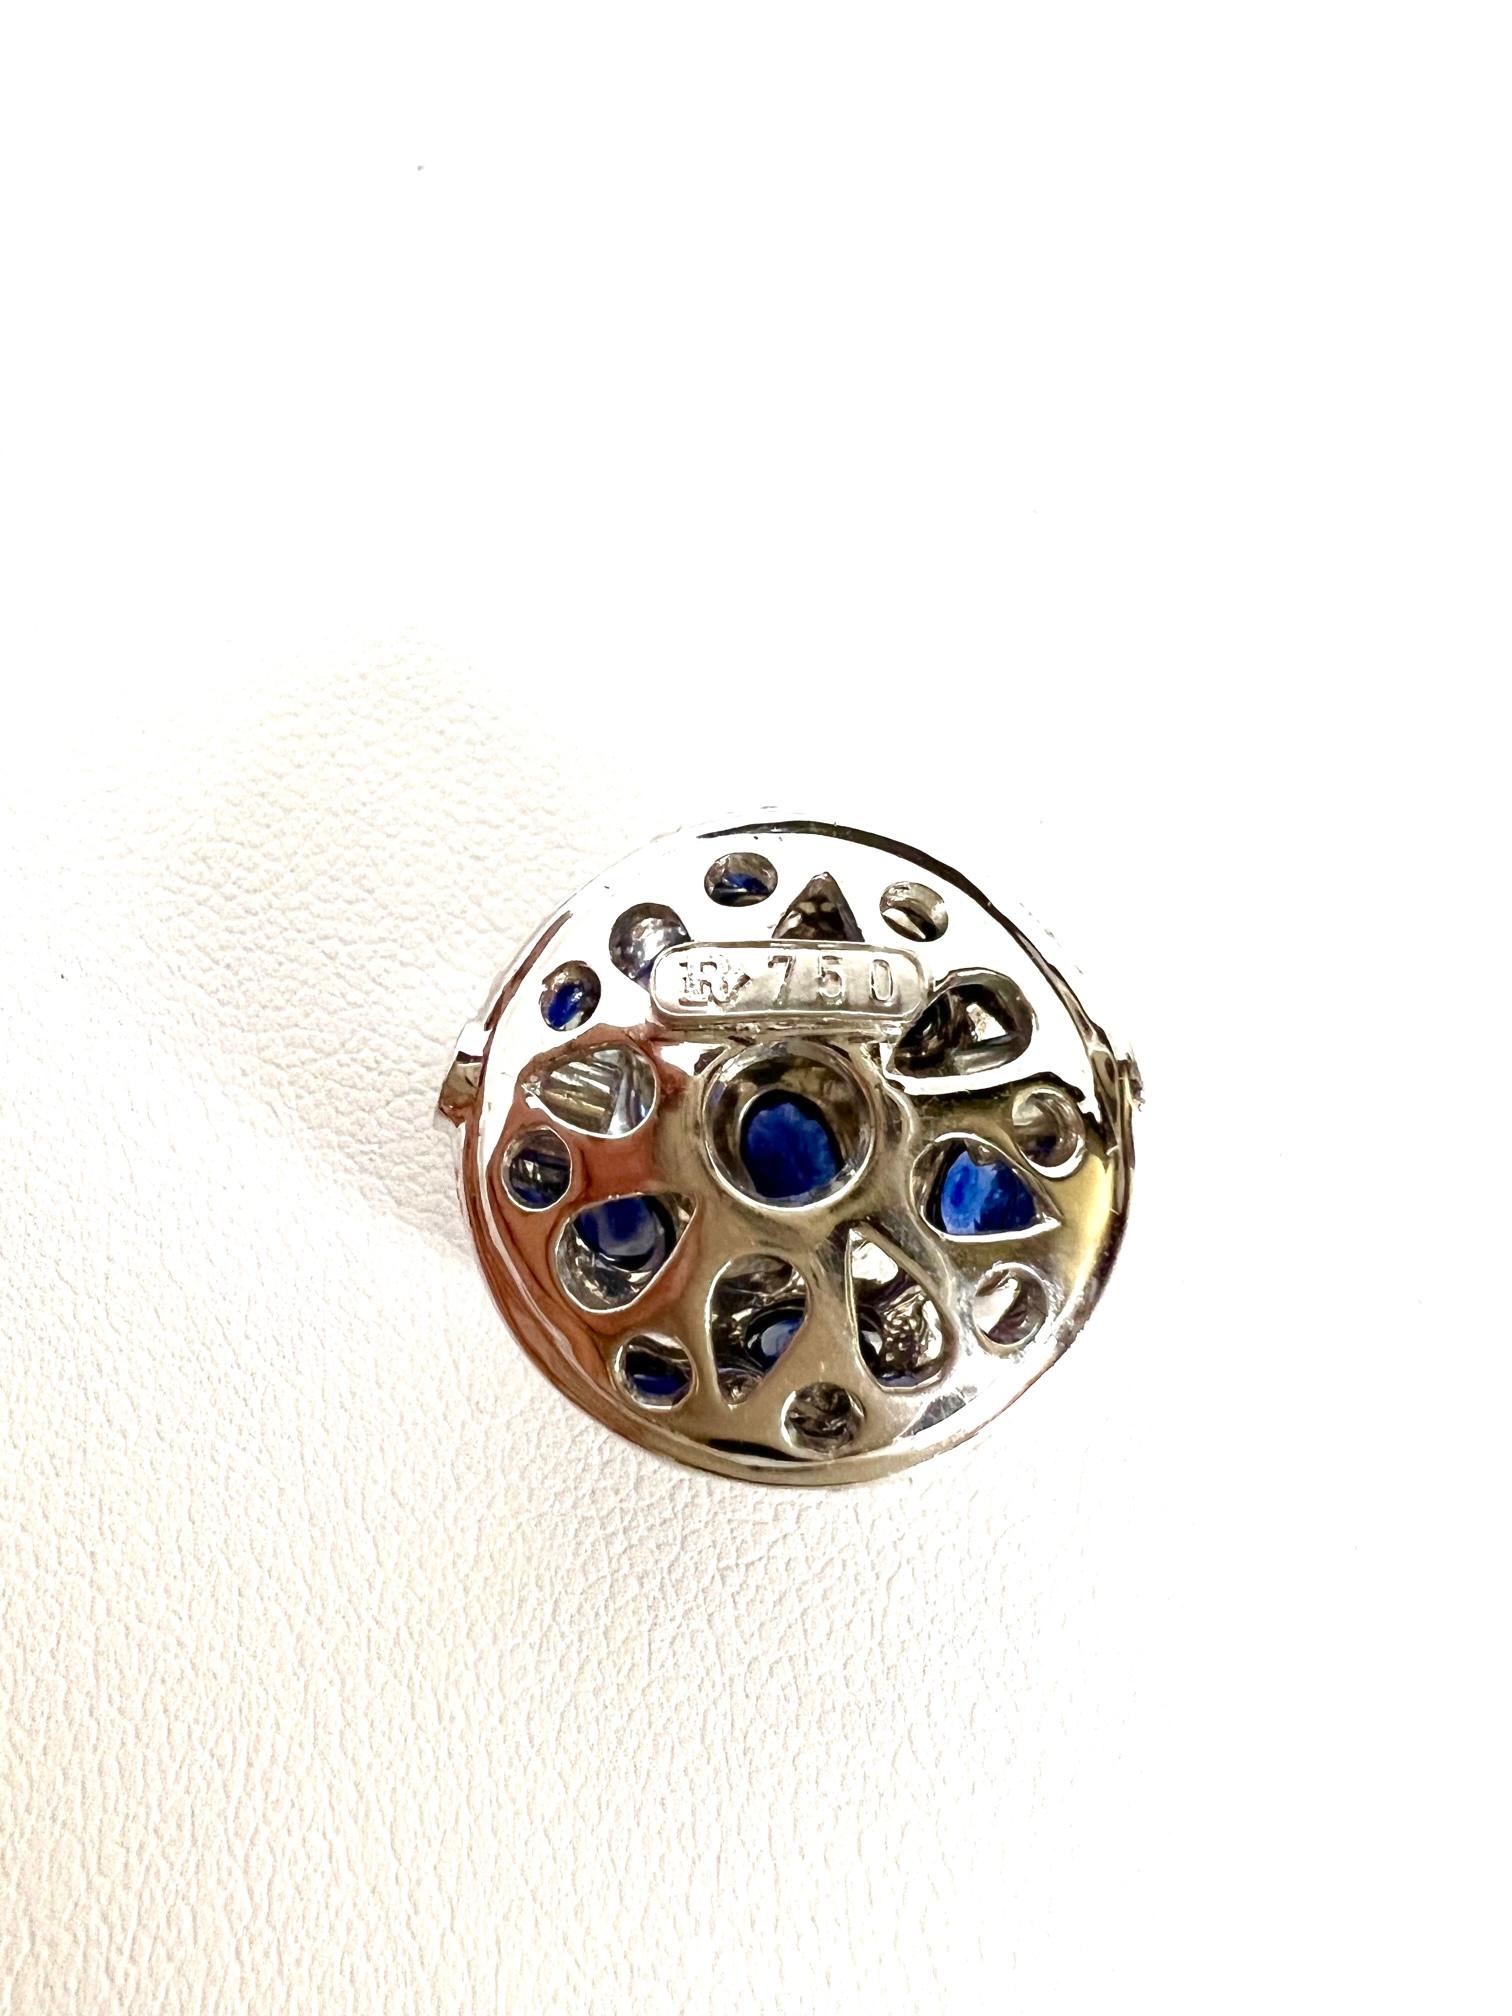 Thomas Leyser is renowned for his contemporary jewellery designs utilizing fine gemstones..

This clasp - pendant in 18k white gold 8,3gr. with 13 Sapphires oval 3,25cts. and 208 diamonds G/VS 0,88cts. is shaped like a bead. It can be 